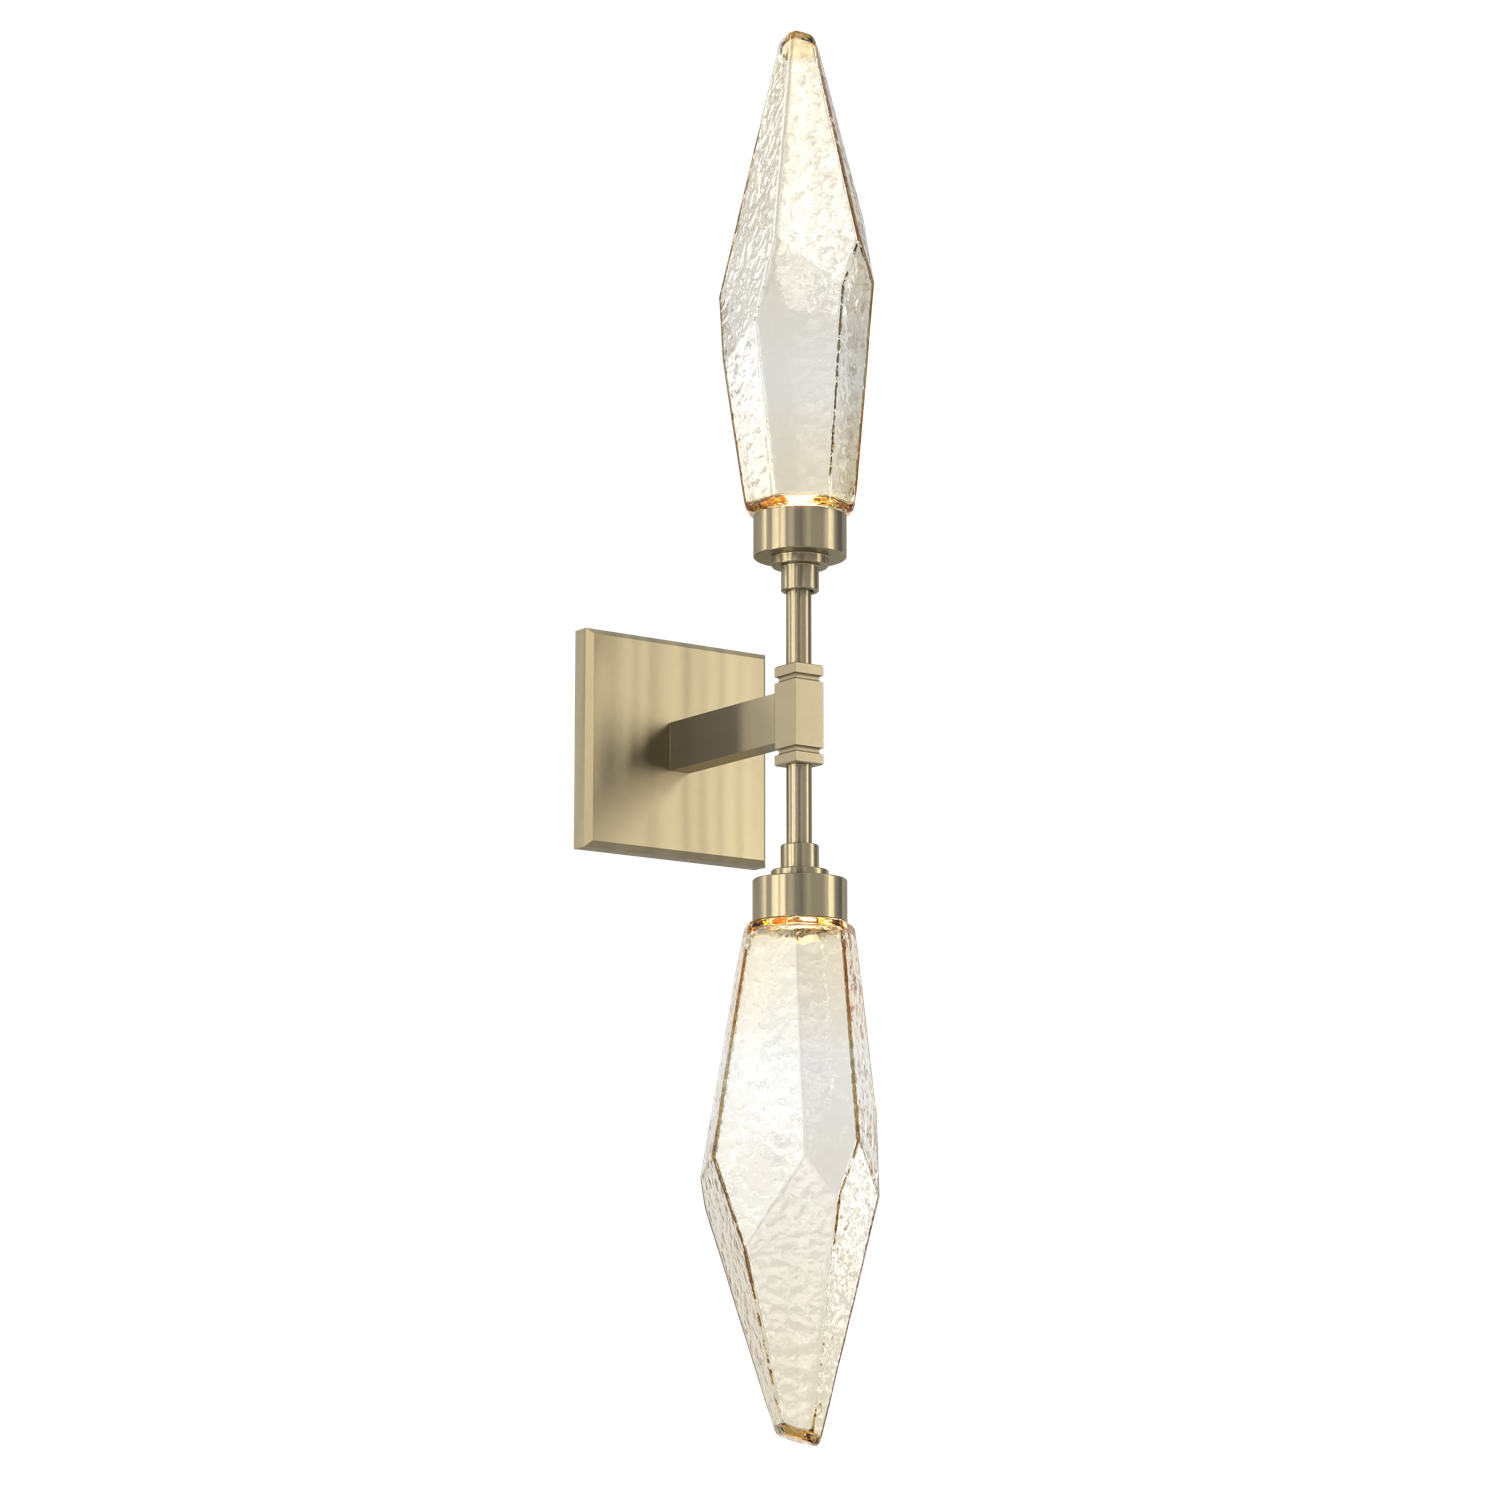 IDB0050-02-HB-CA-Hammerton-Studio-Rock-Crystal-wall-sconce-with-heritage-brass-finish-and-chilled-amber-blown-glass-shades-and-LED-lamping